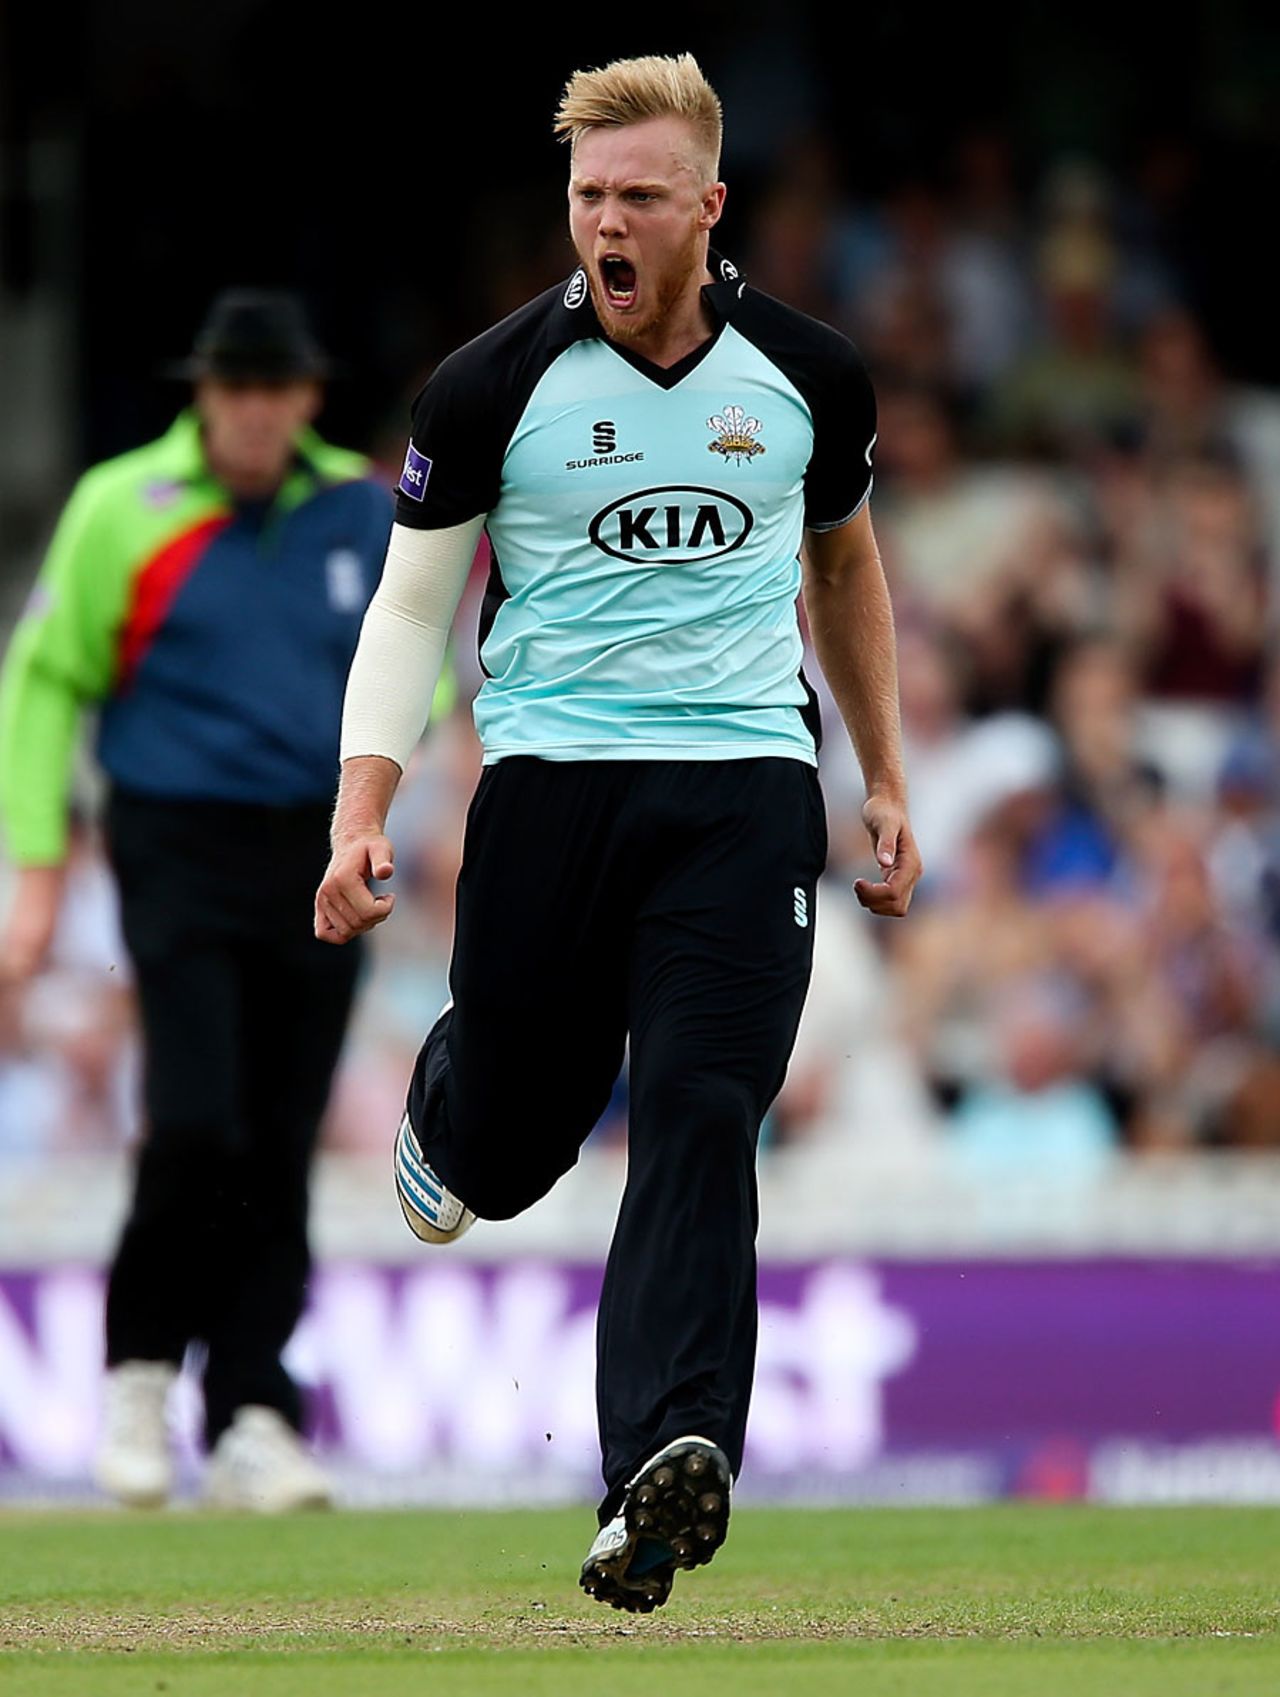 Matt Dunn bowled with eye-catching pace, Surrey v Worcestershire, NatWest T20 Blast quarter-final, The Oval, August 2, 2014